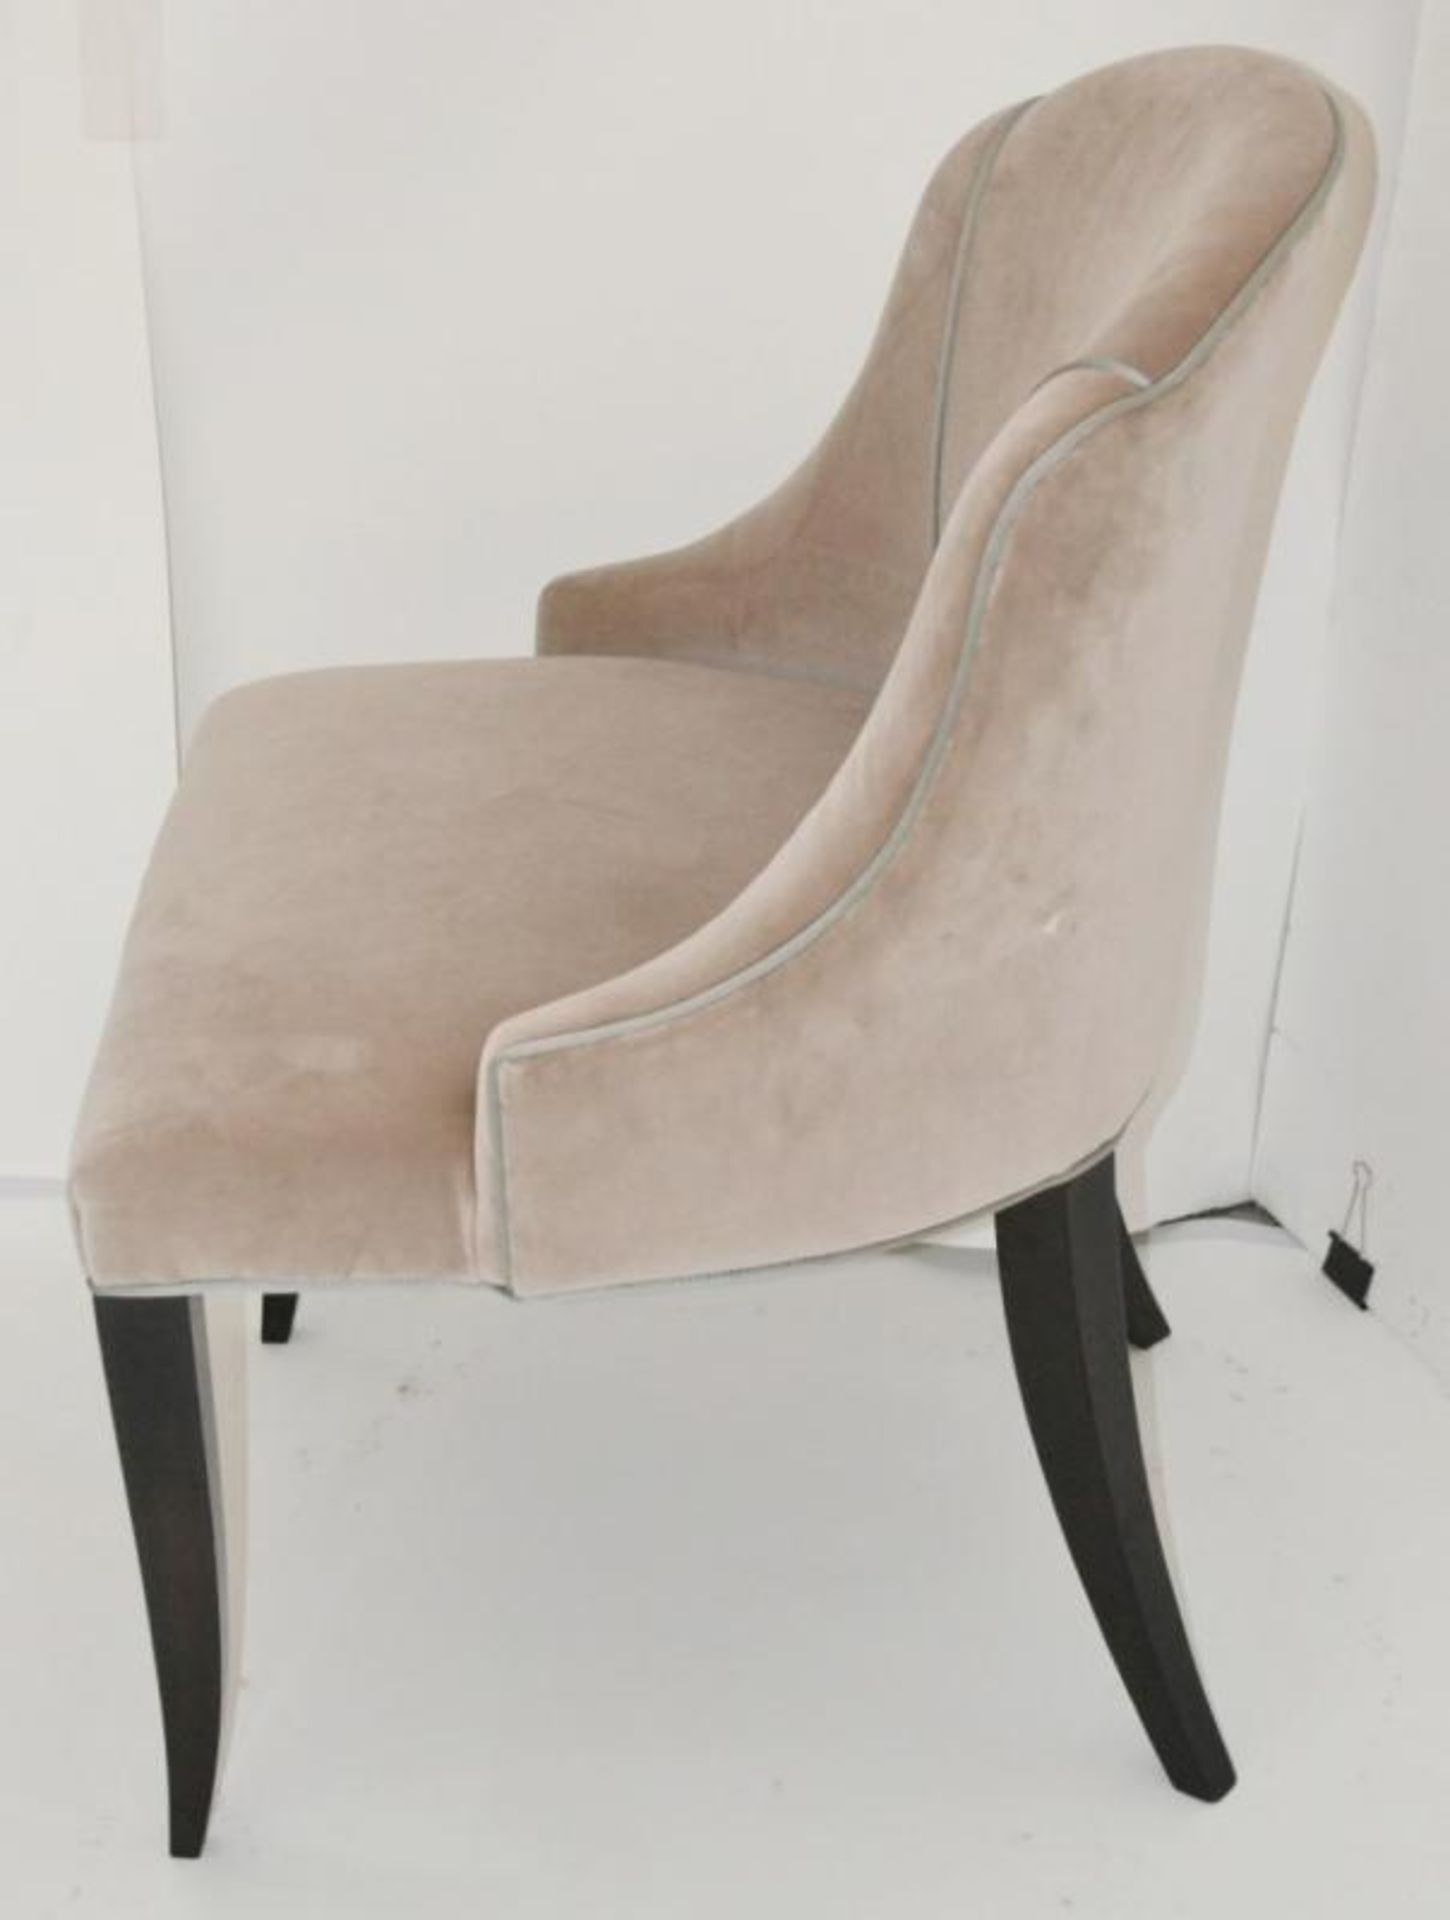 1 x REED &amp; RACKSTRAW "Cloud" Velvet Upholstered Handcrafted Chair - Dimensions: H87 x W58 x D5 - Image 3 of 14